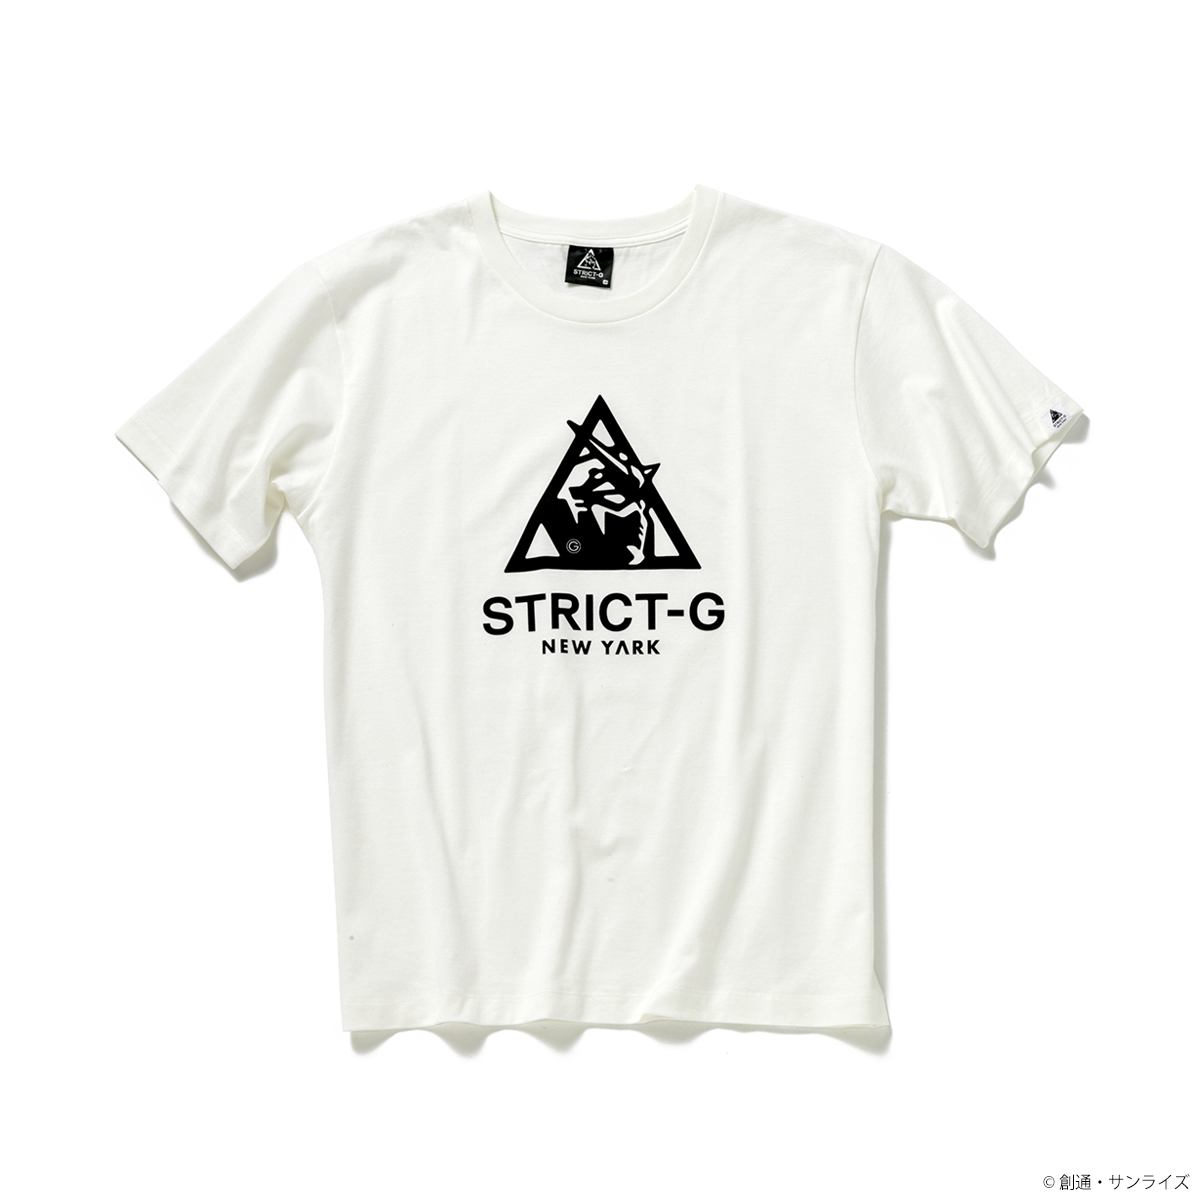 STRICT-G NEW YARK Tシャツ NYマーク柄